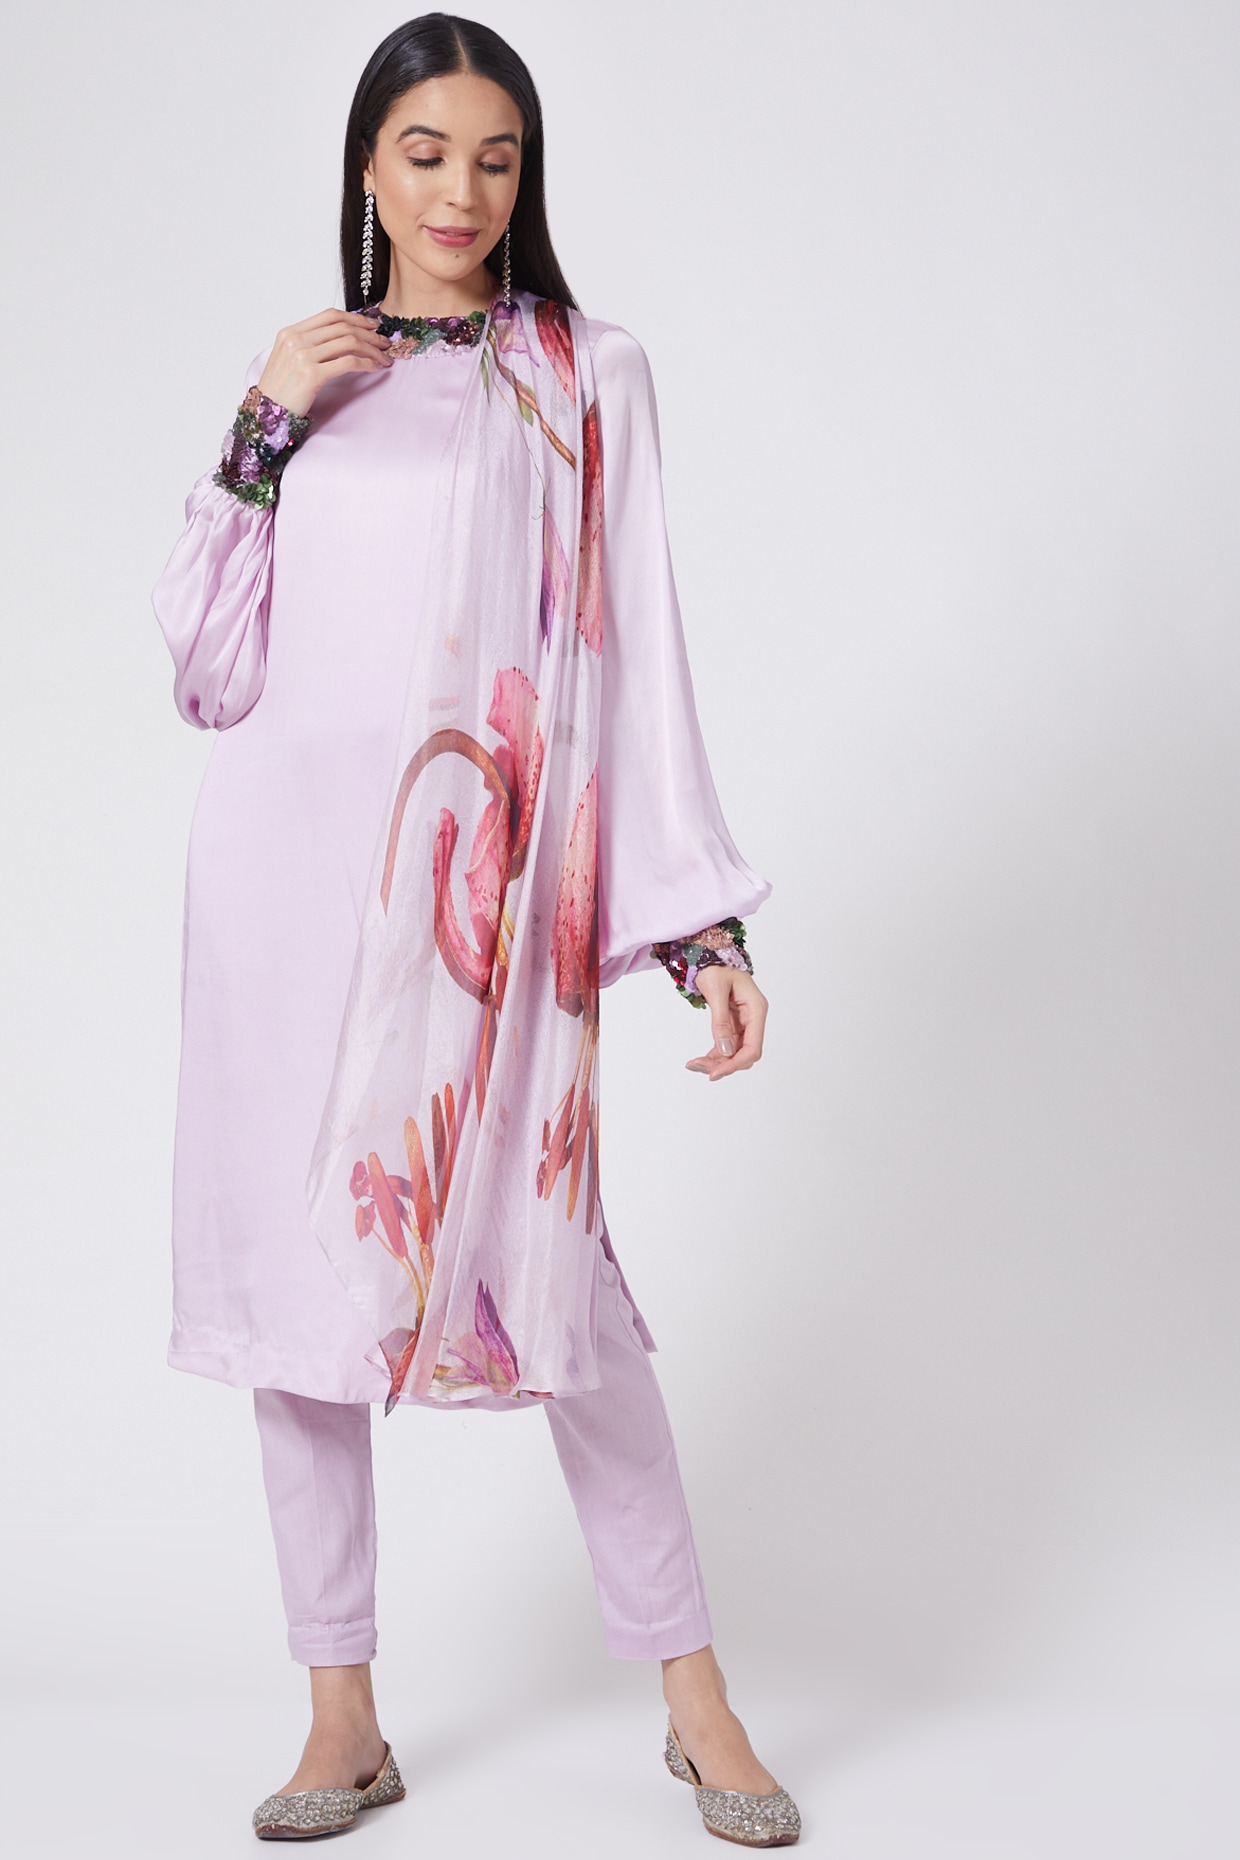 Buy Indo Western Kurtis In India @ Limeroad